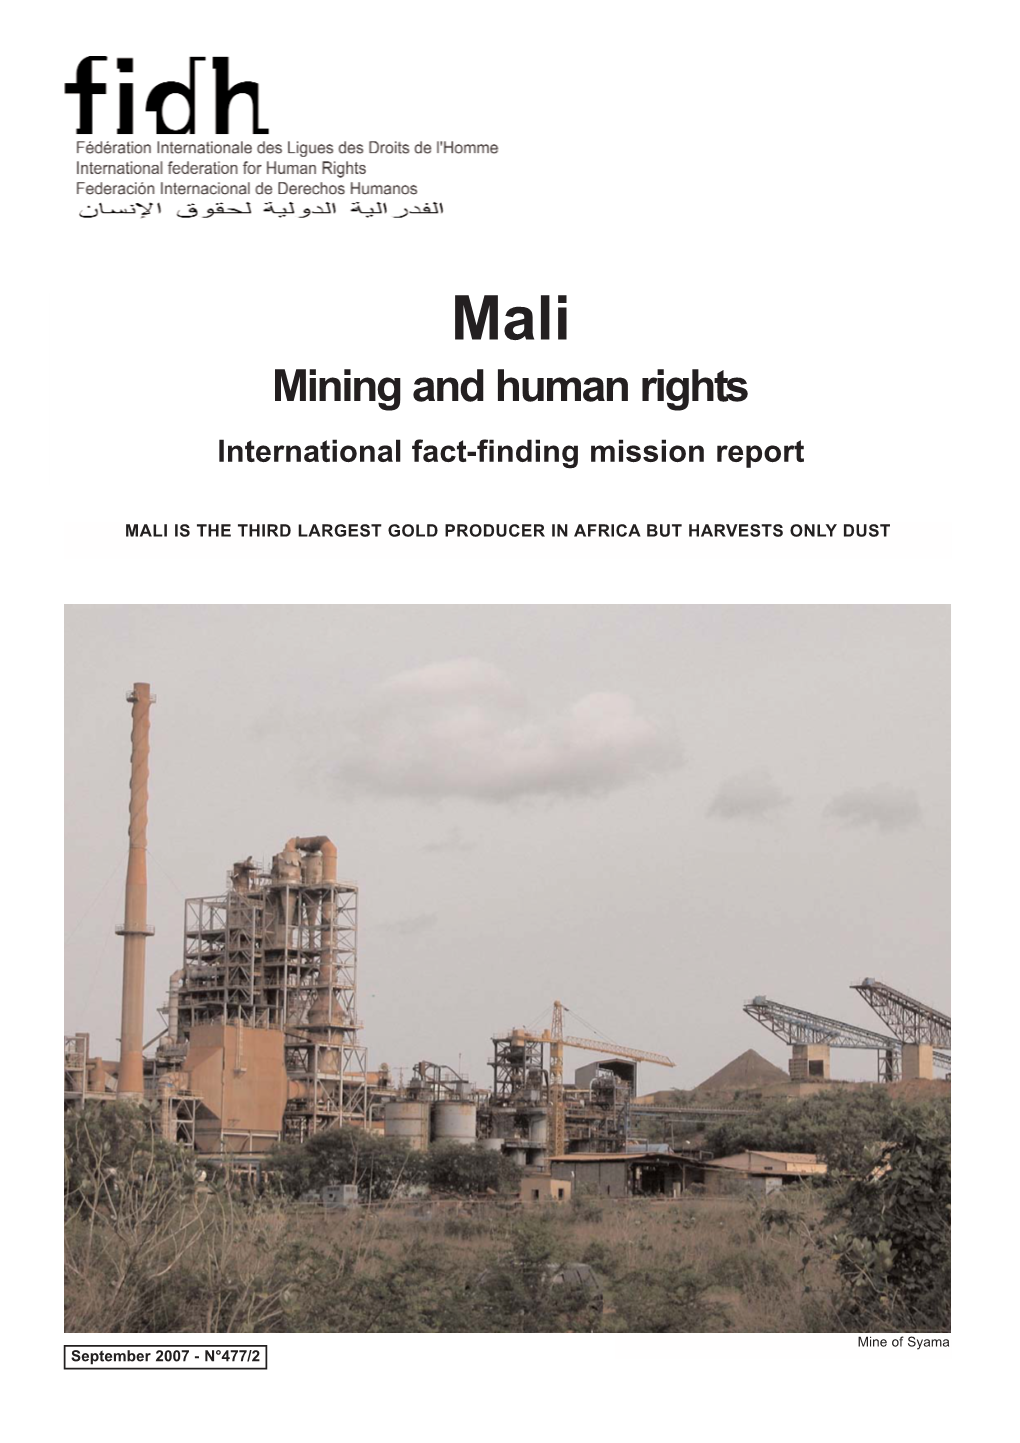 Mining and Human Rights International Fact-Finding Mission Report